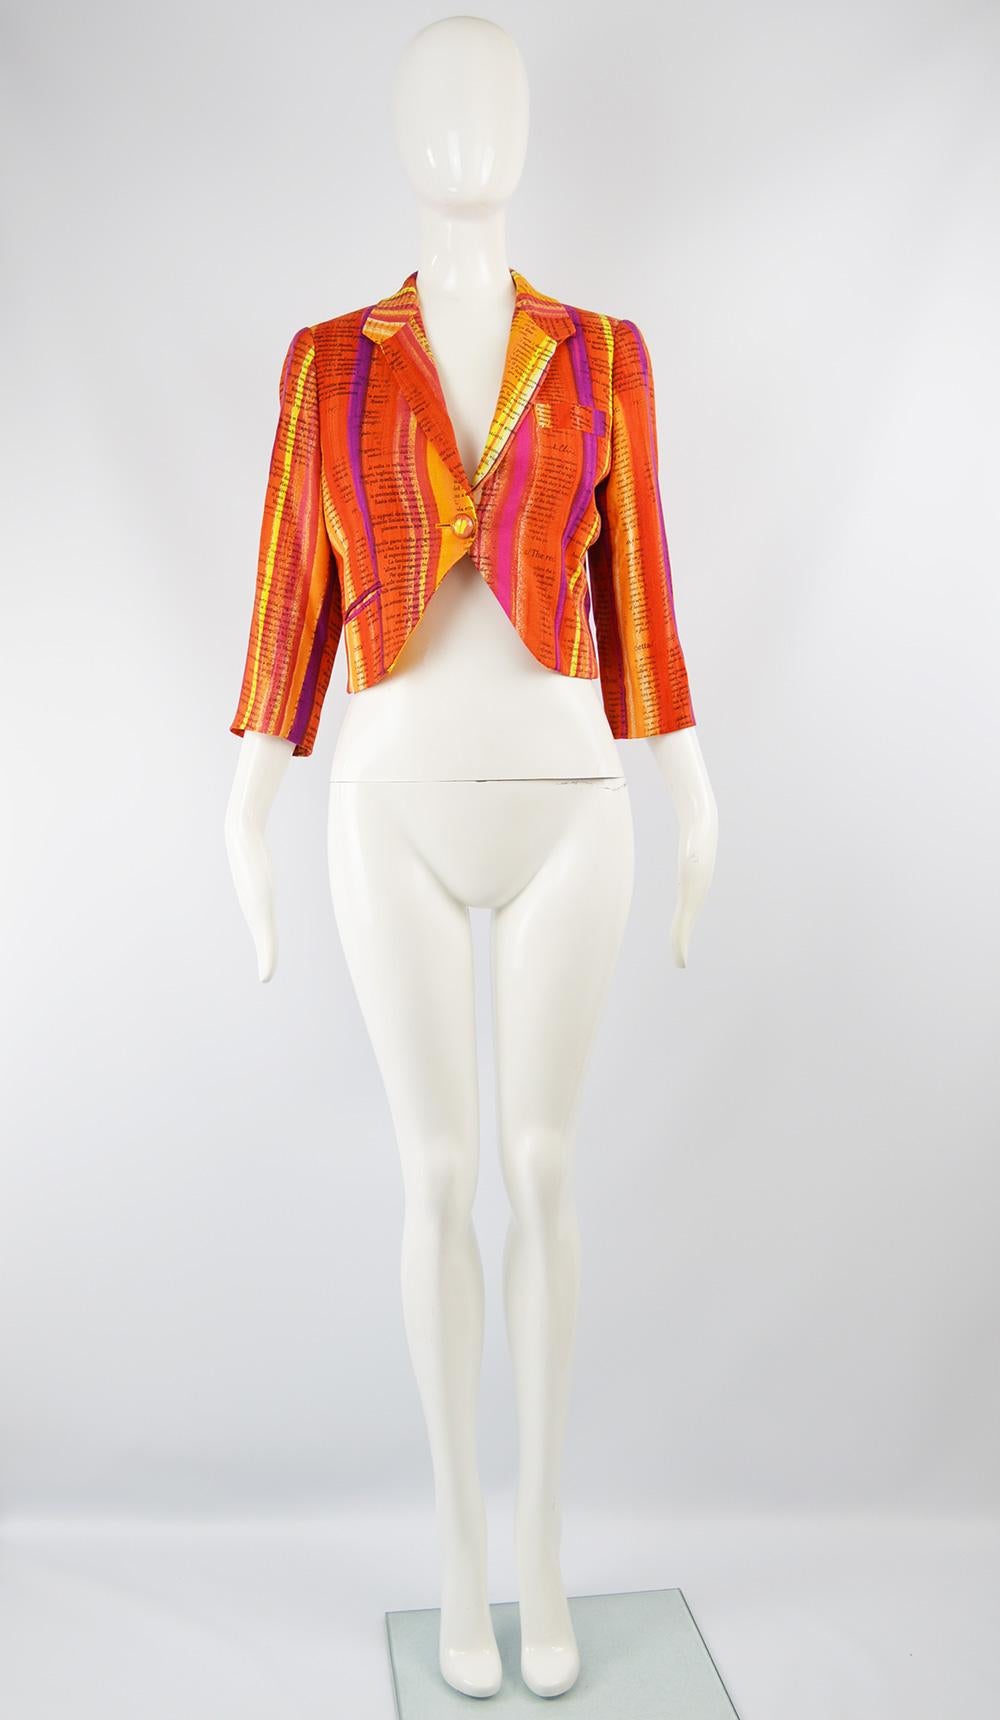 A bold and fun vintage women's cropped jacket from the 90s by Moschino for the Cheap and Chic line. In a rayon fabric that is woven in a way that it feels like linen and has watercolor inspired stripes in hues of oranges, purples, reds and white to